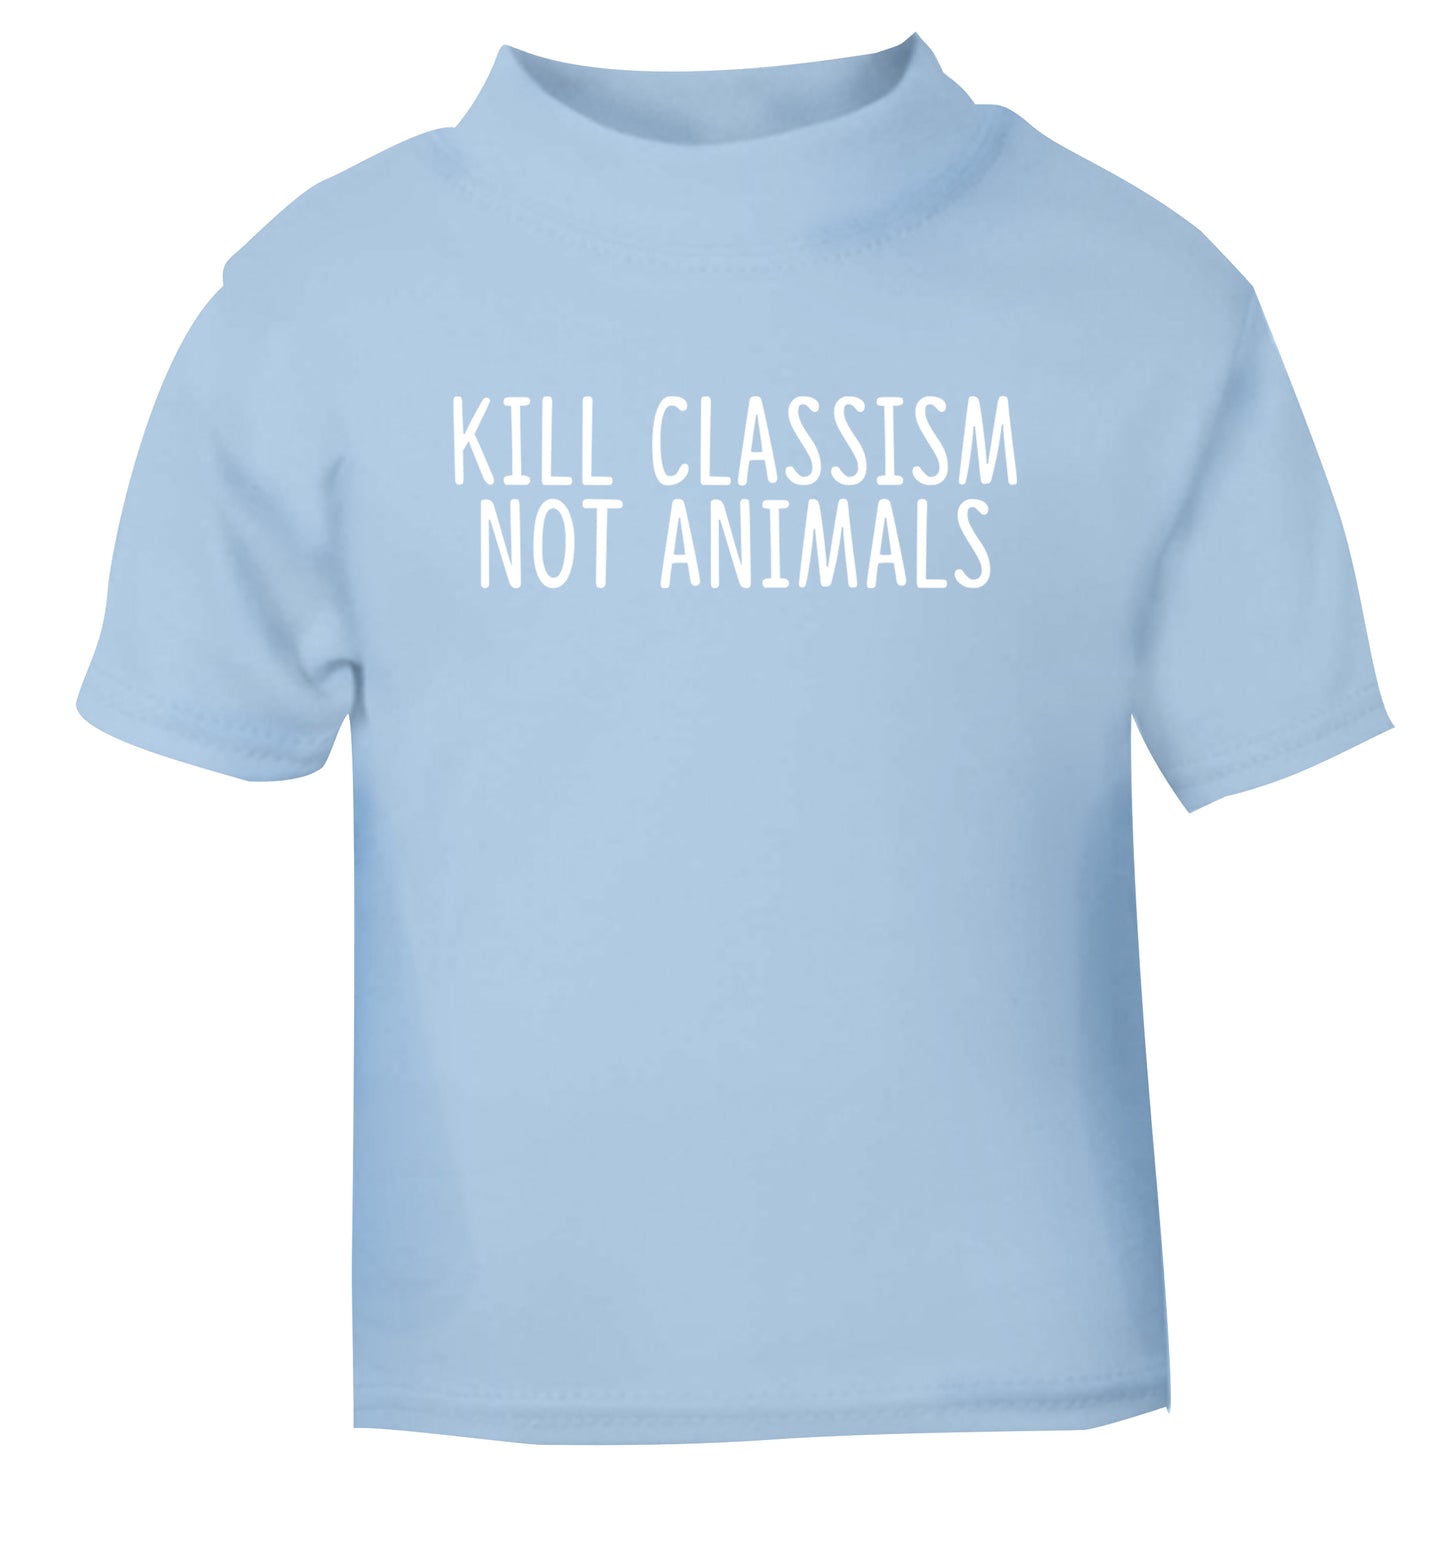 Kill Classism Not Animals light blue Baby Toddler Tshirt 2 Years